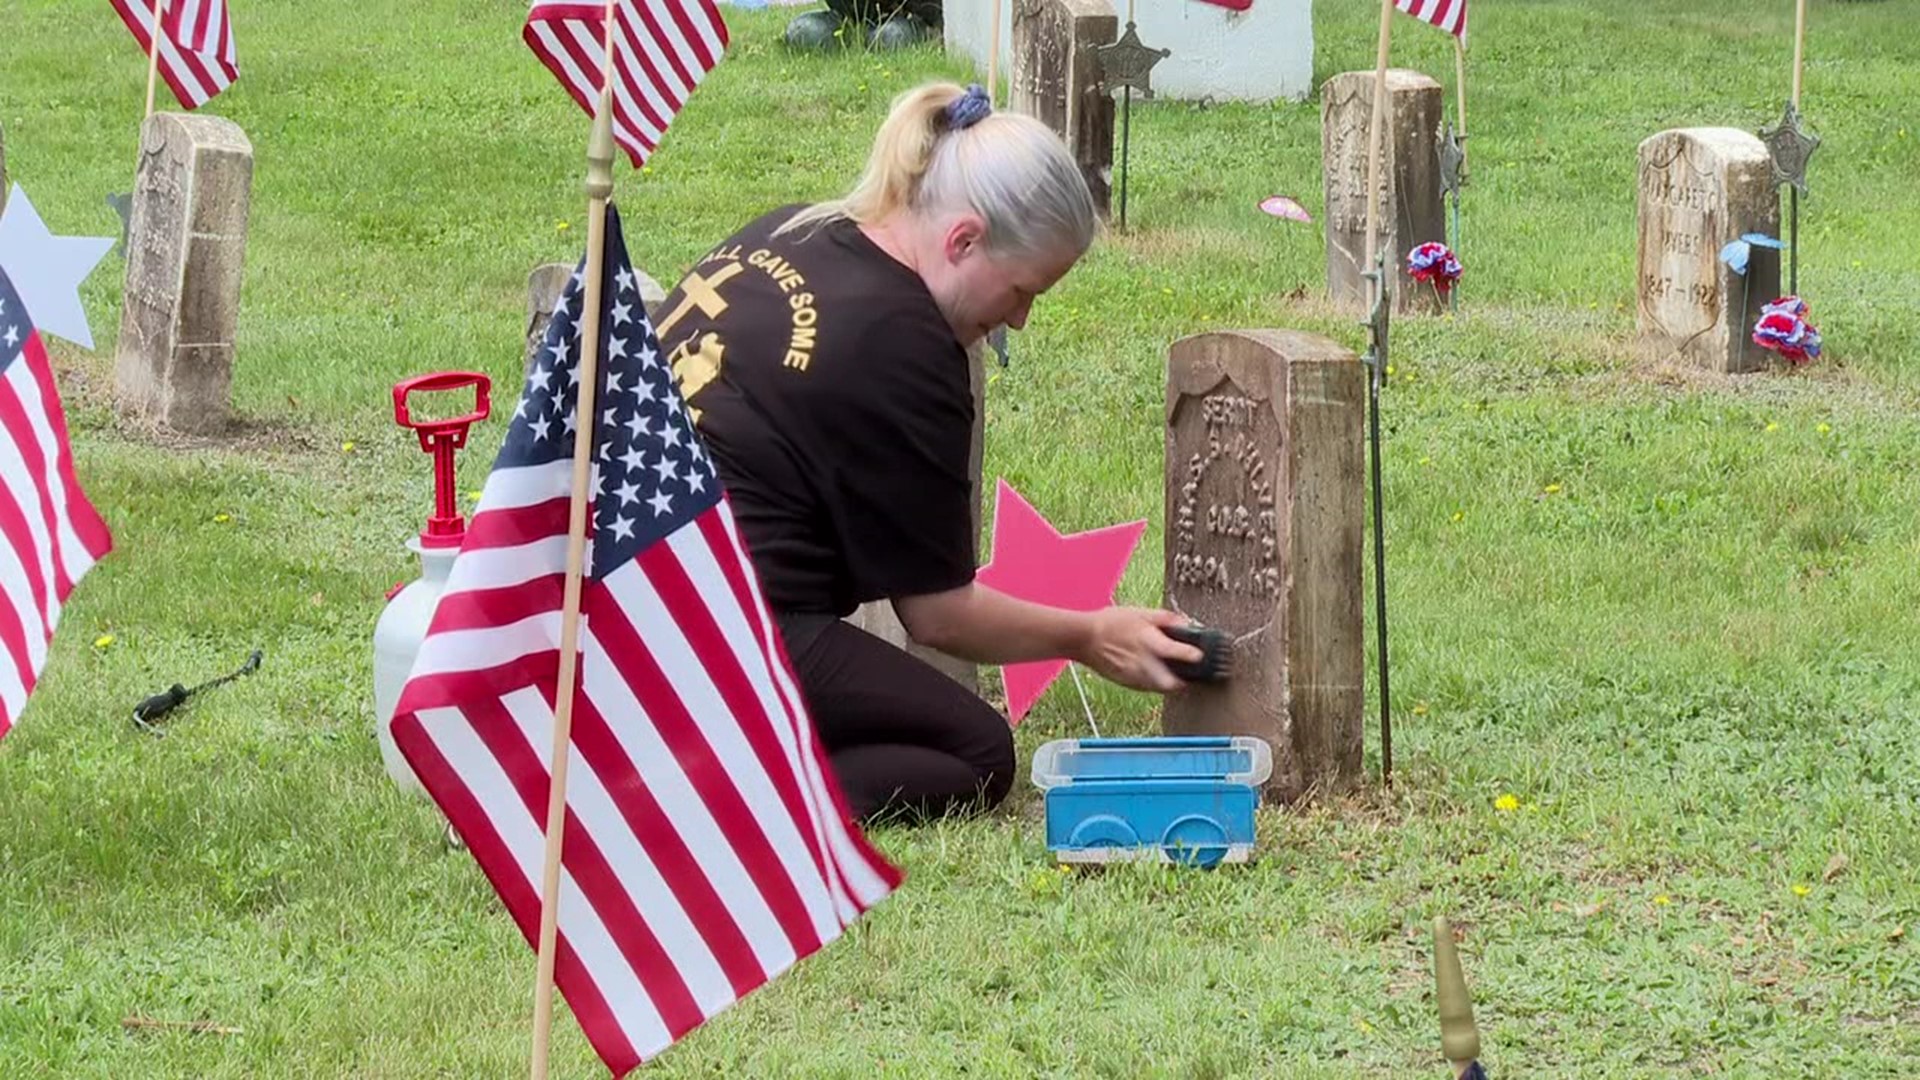 Over the past year, Alicia Lee has cleaned 256 veteran headstones. She hopes to increase the number to 400 by July 4.